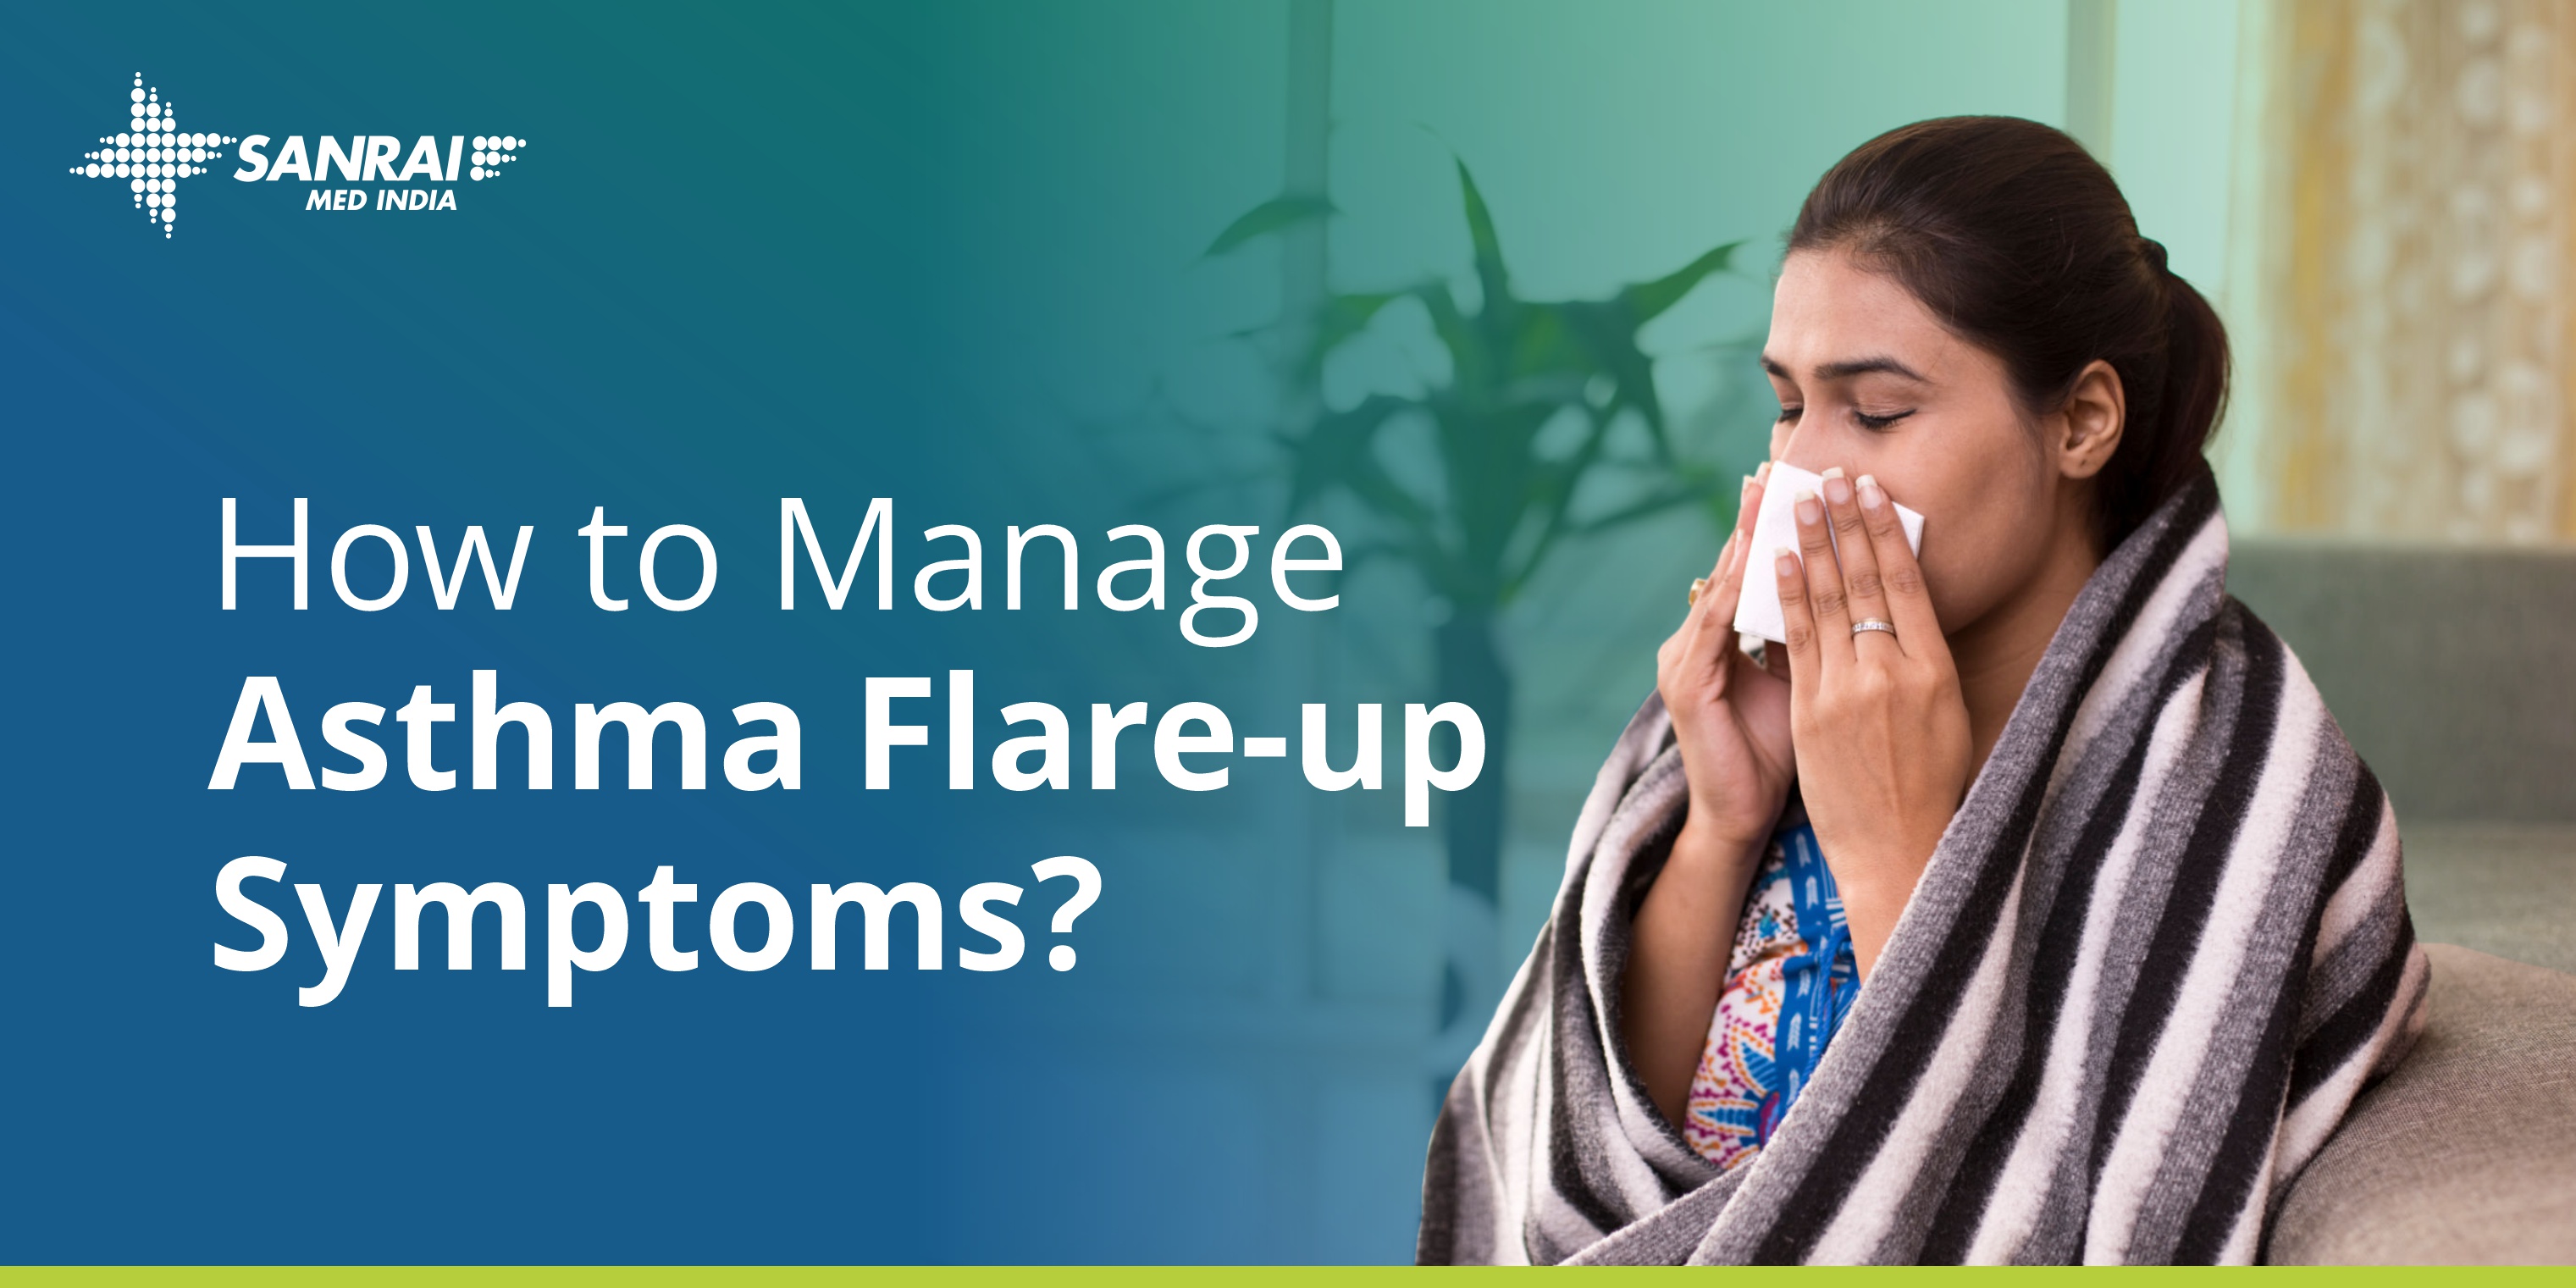 How to Manage Asthma Flare-up Symptoms?